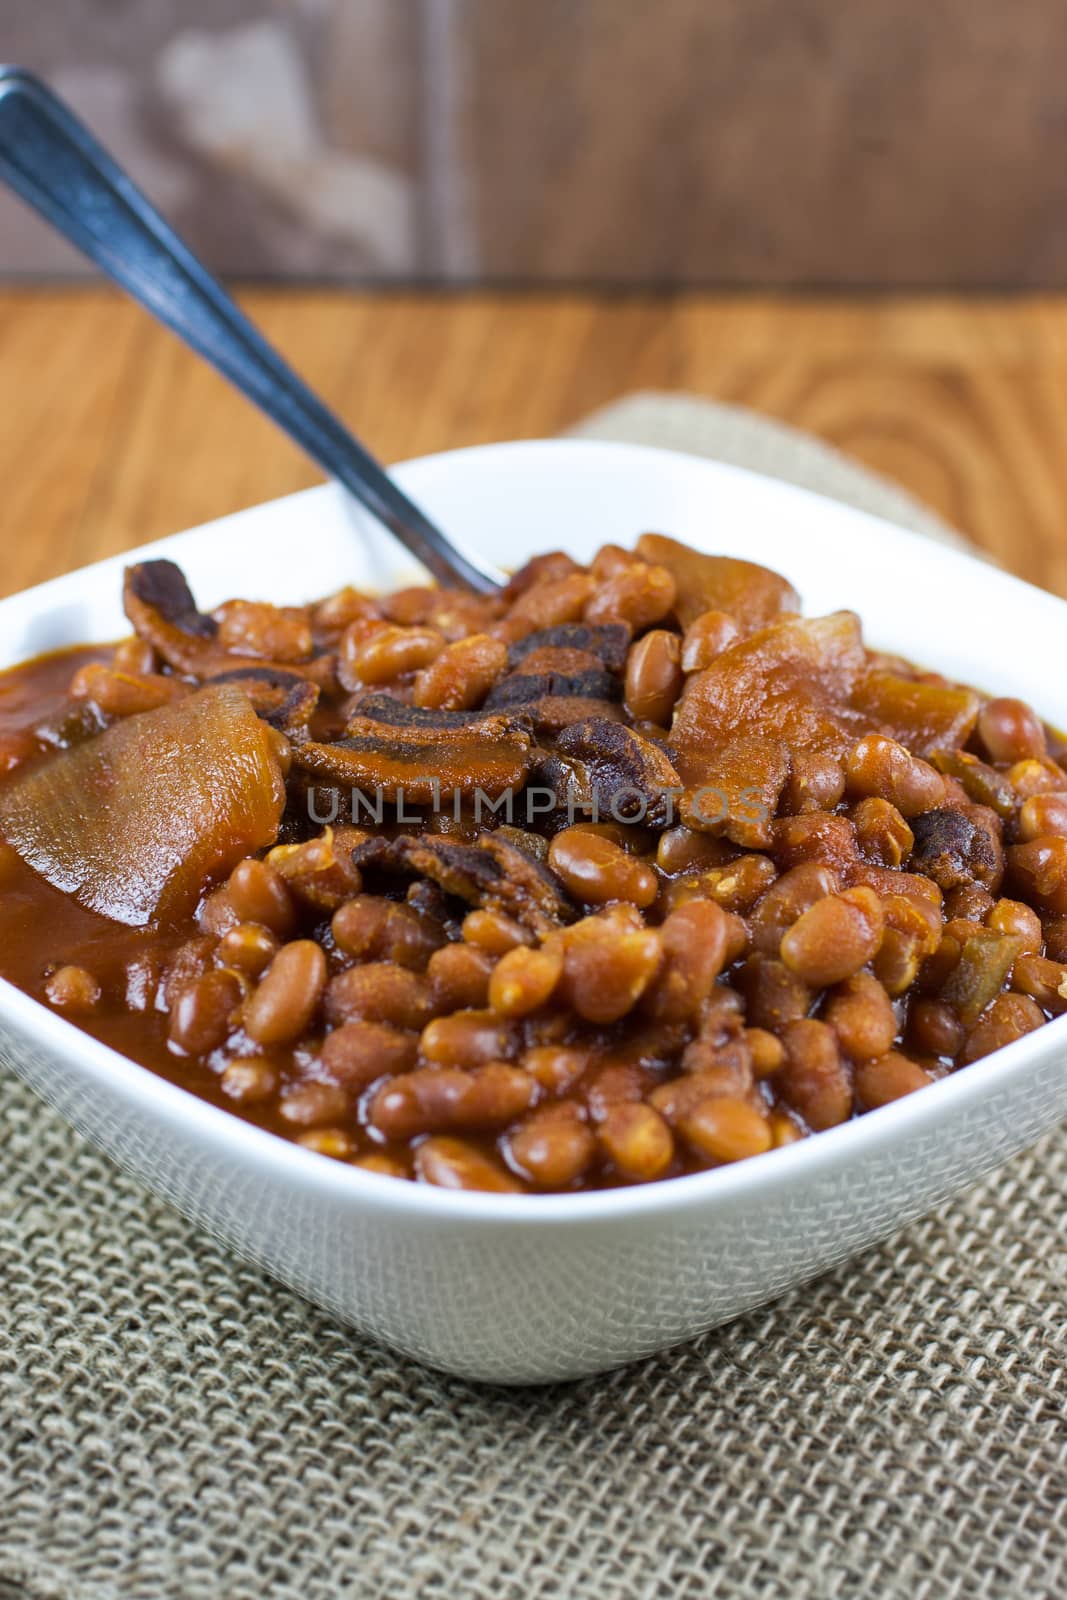 Baked Beans in a bowl by SouthernLightStudios